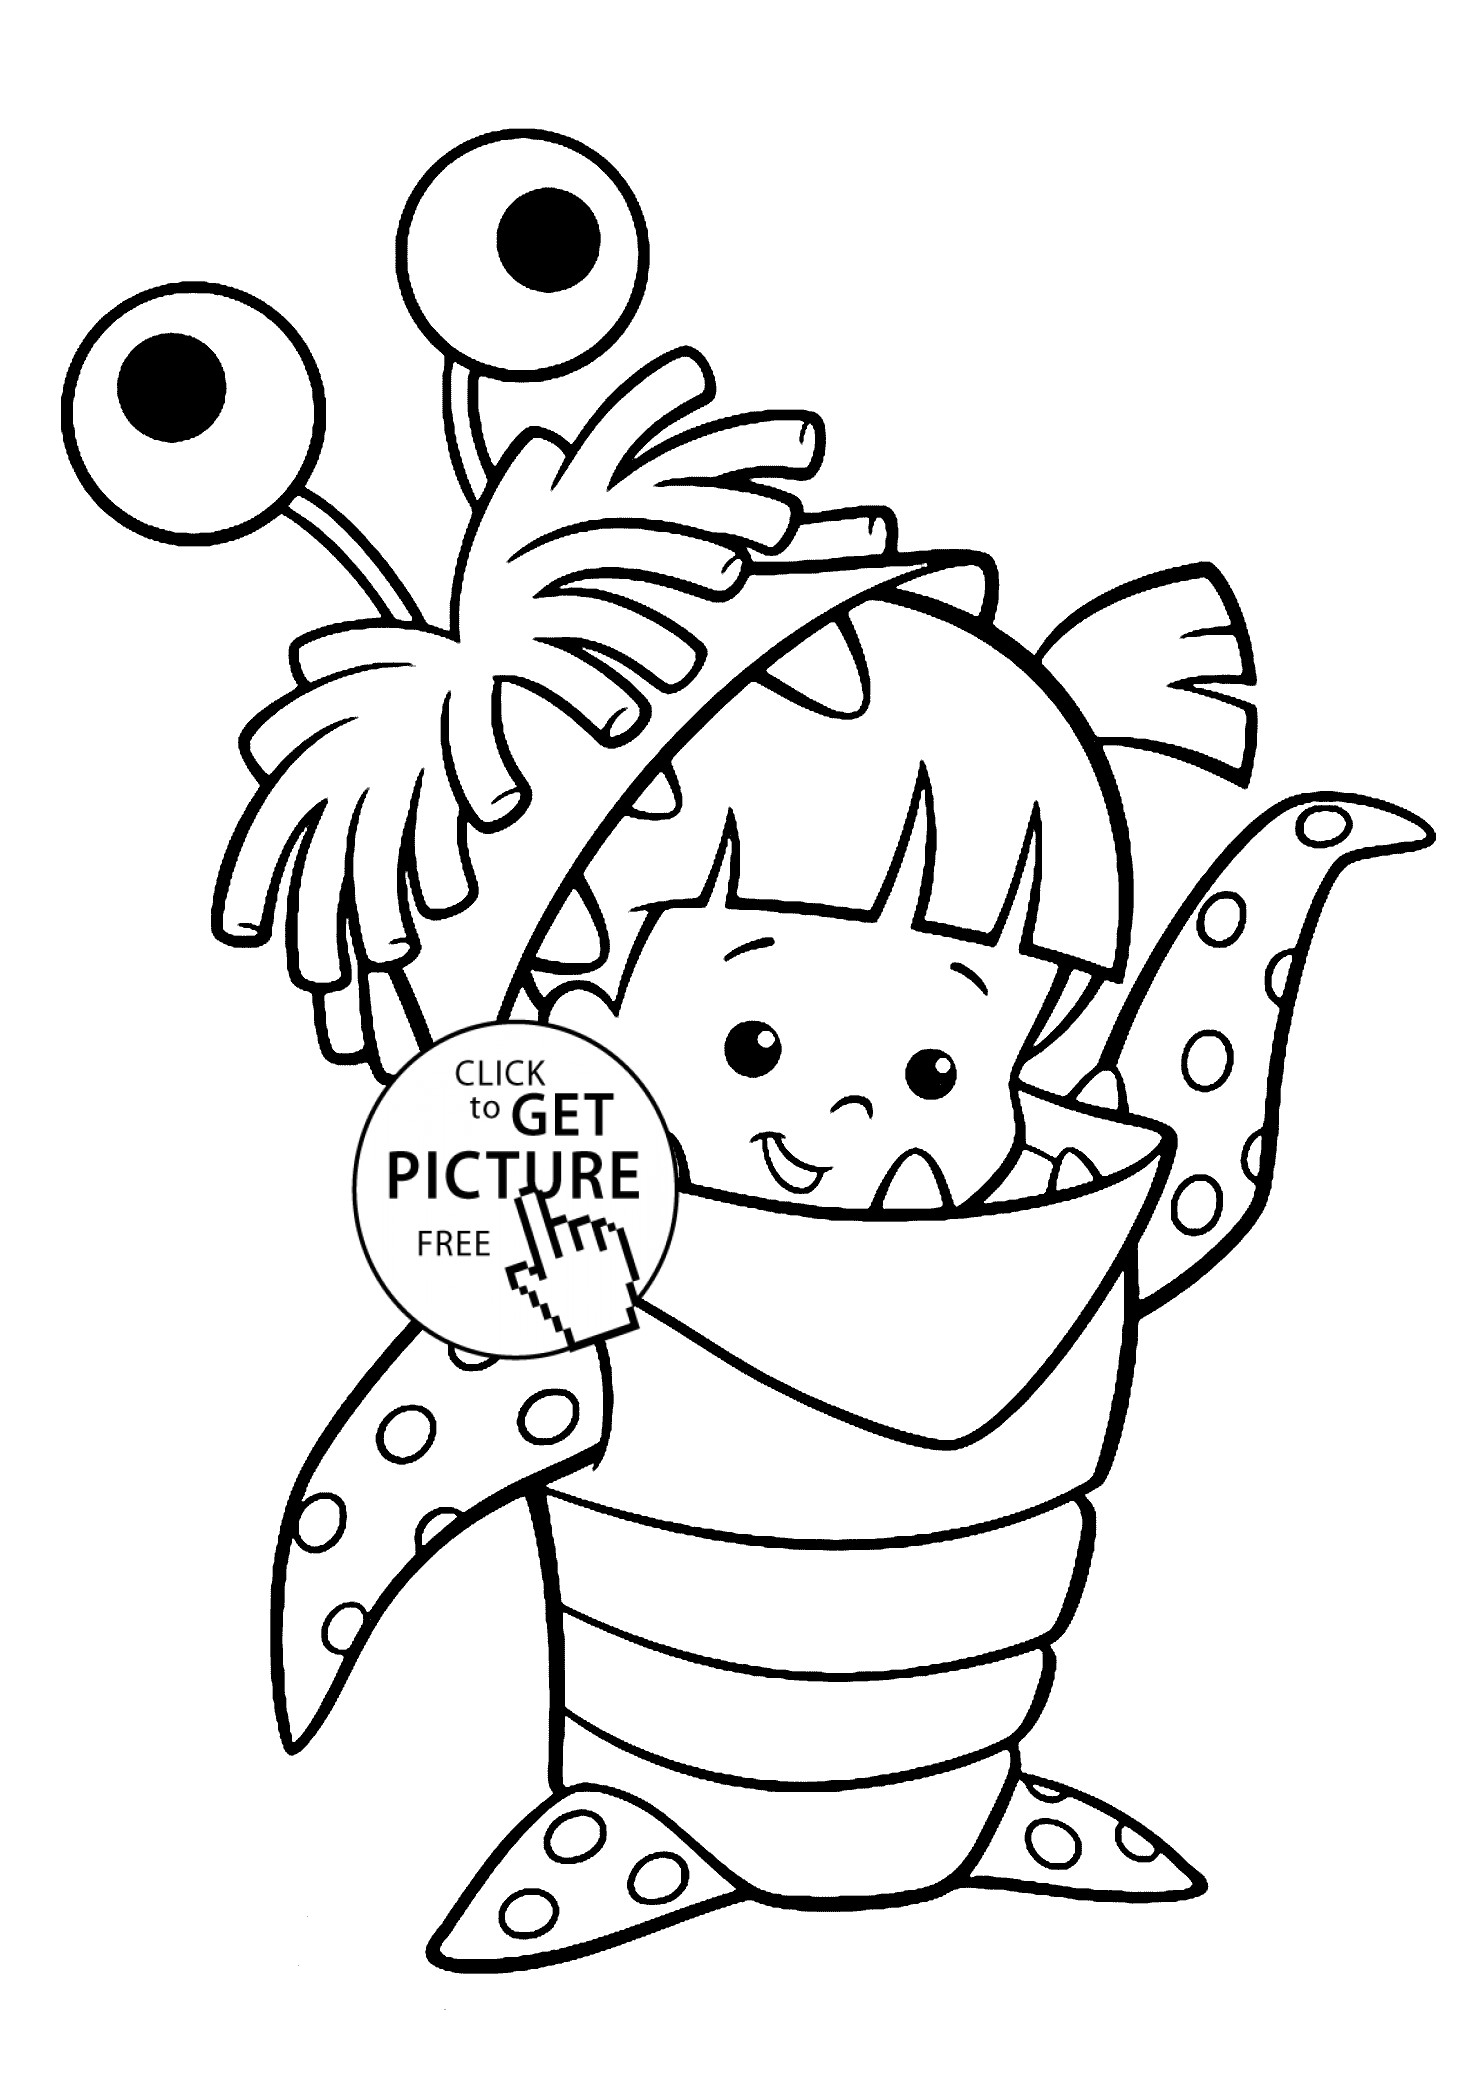 Printable Monster Coloring Pages
 Boo costume Monster Inc coloring pages for kids printable